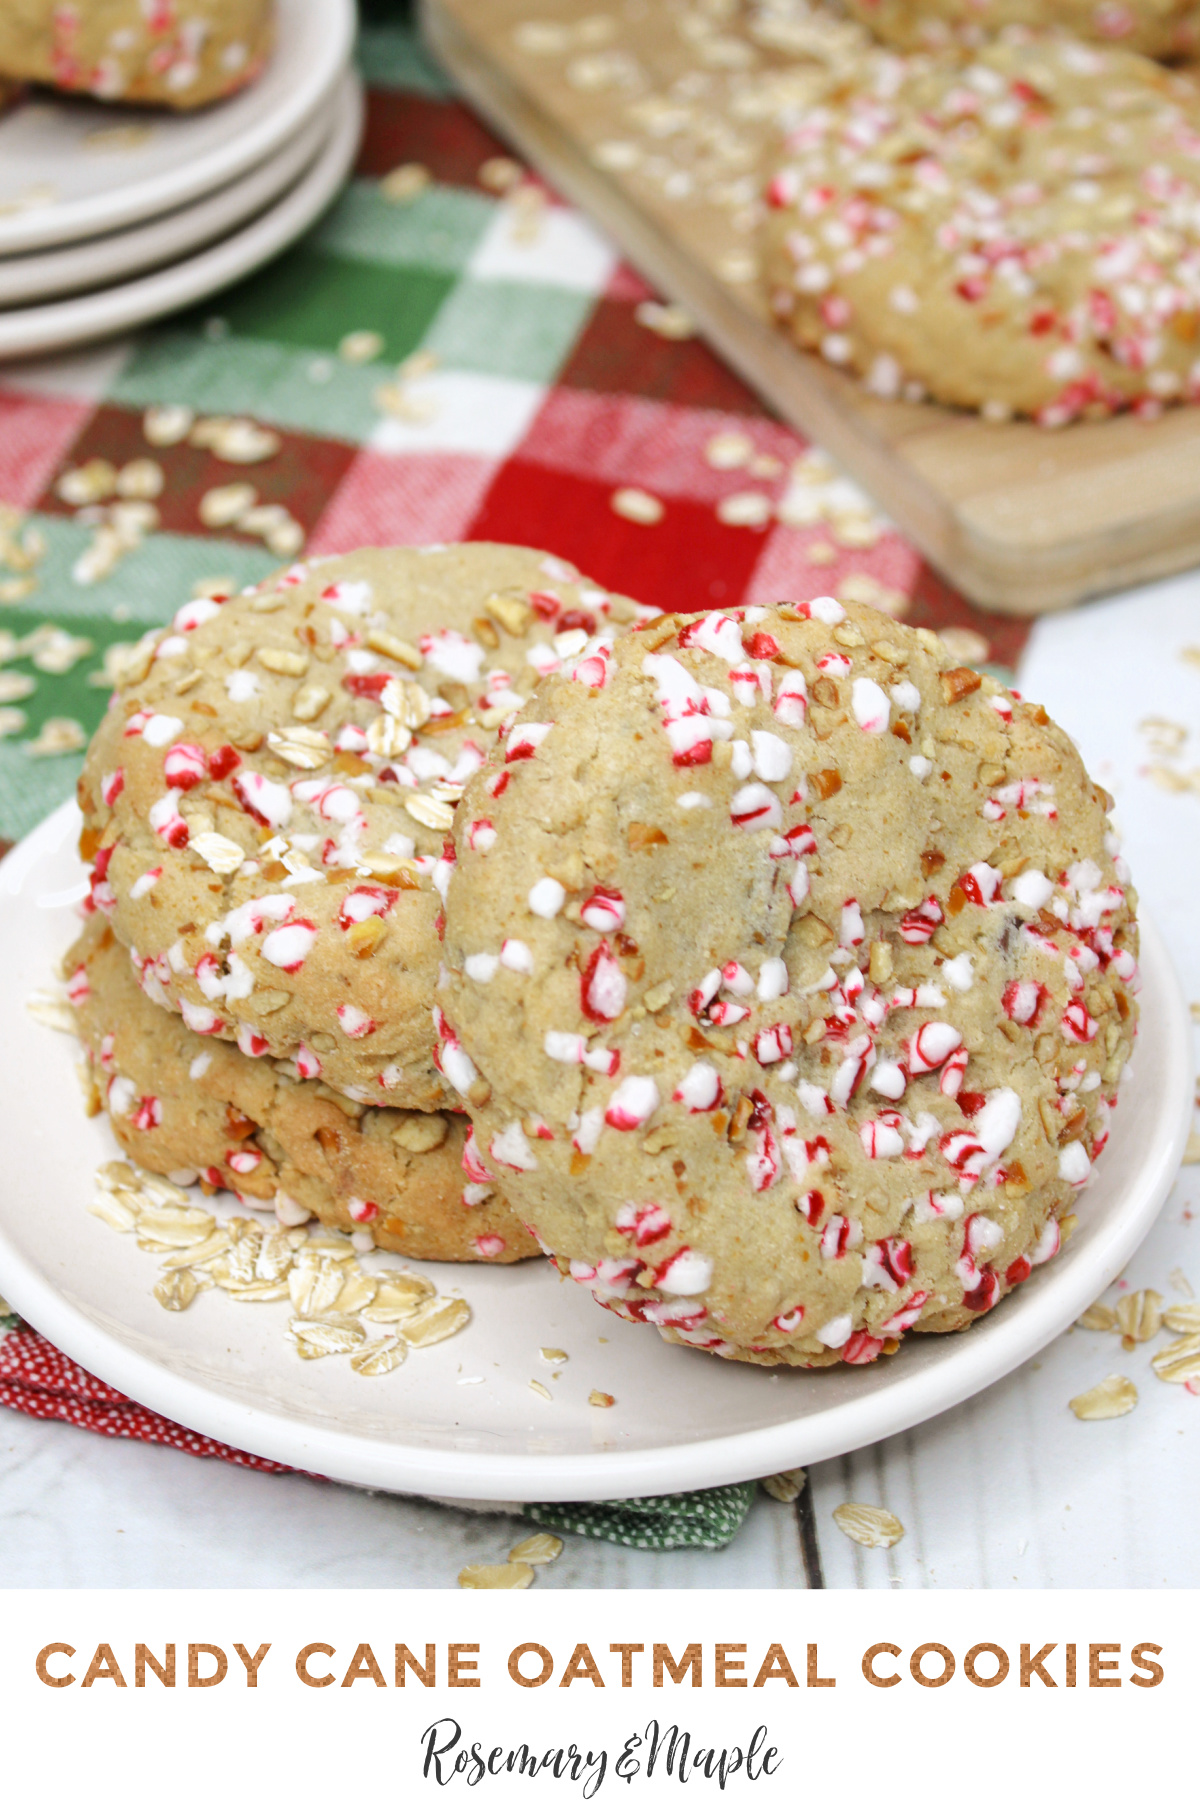 These Candy Cane & Pretzel Oatmeal Cookies are a perfect addition to your holiday cookie platter. They're easy, festive and so pretty too.